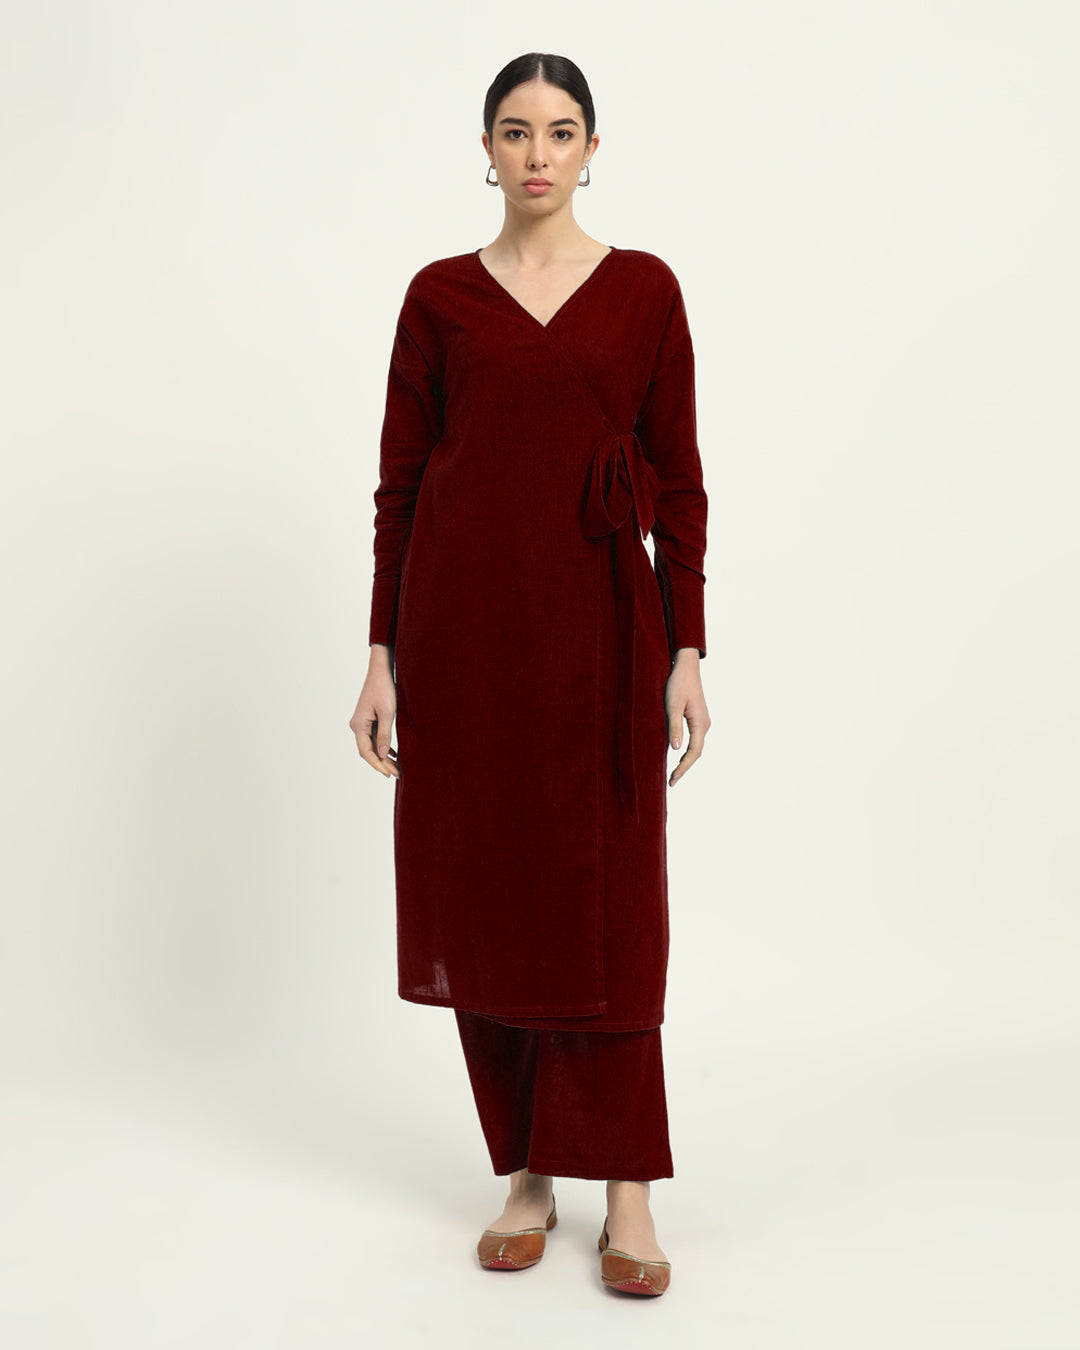 Russet Red Ribbon Wrap Solid Kurta (Without Bottoms)